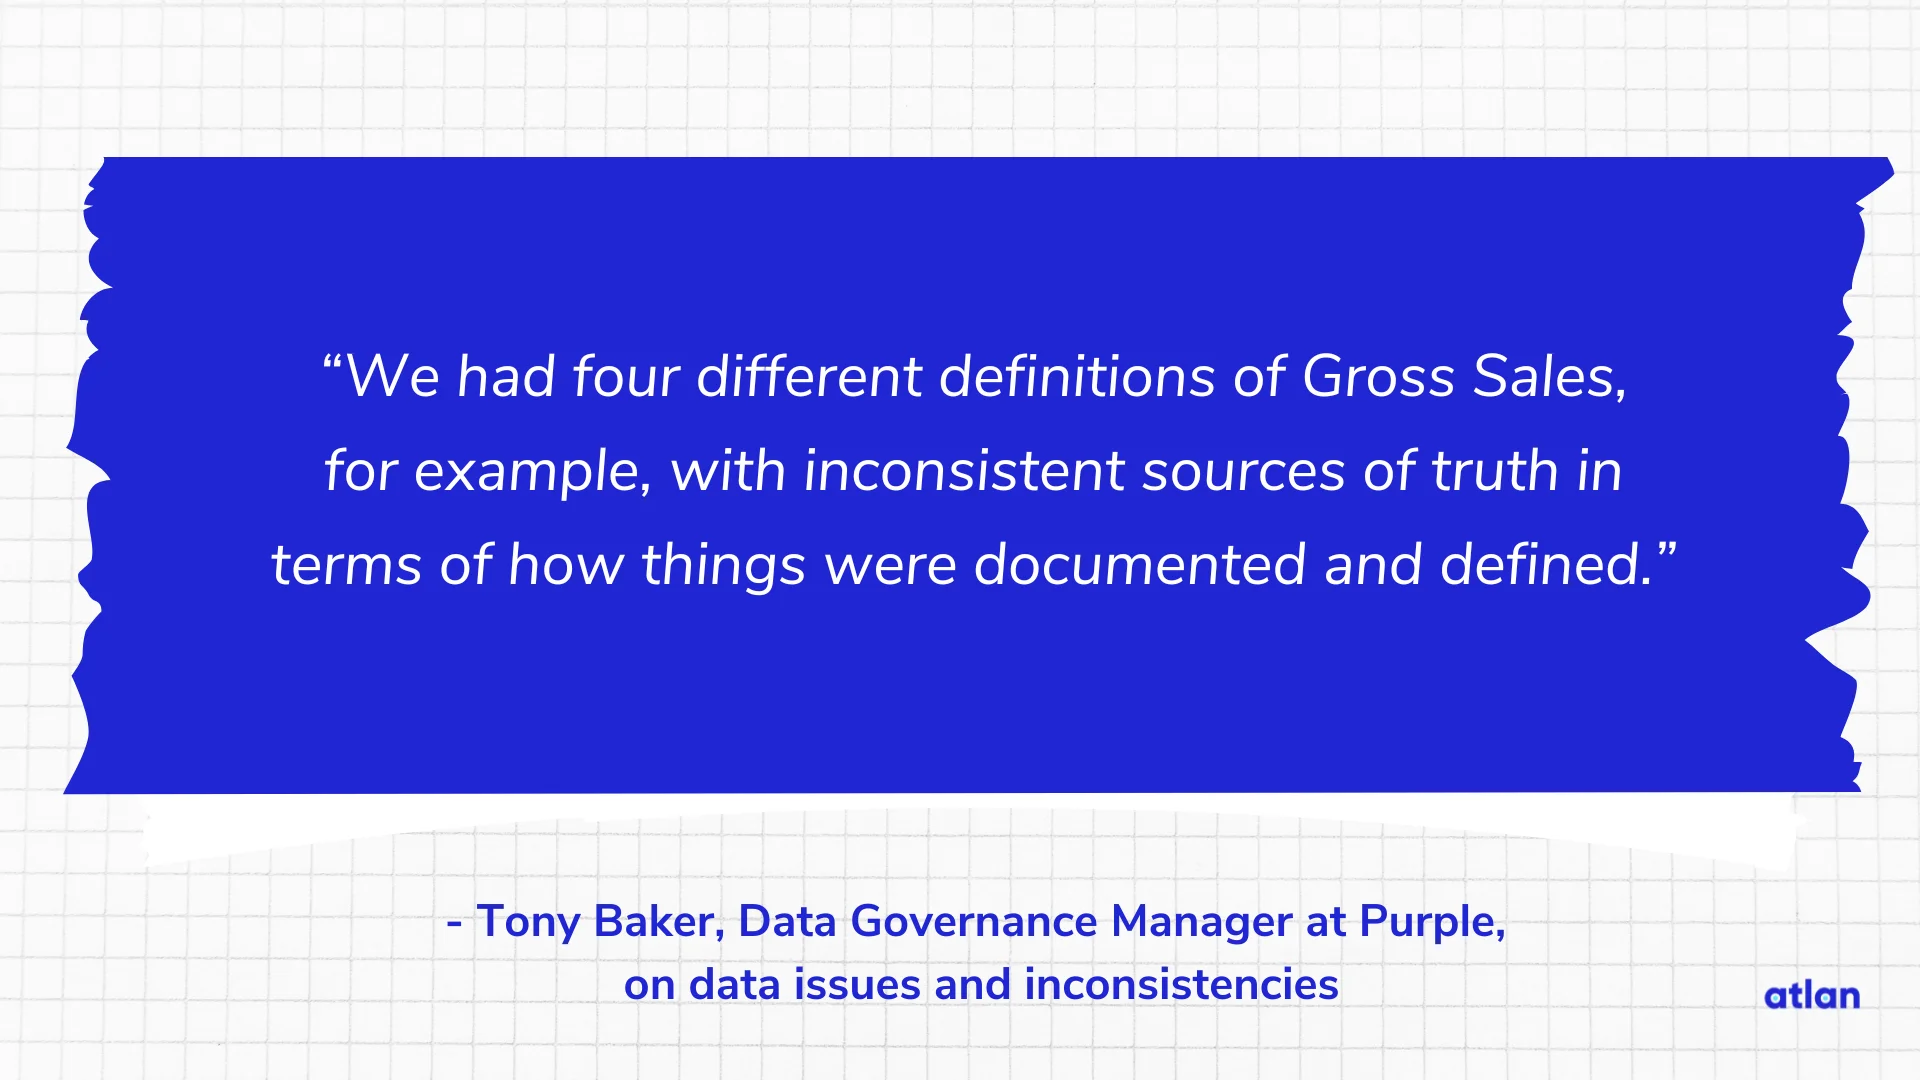 Tony Baker, Data Governance Manager at Purple, on data issues and inconsistencies